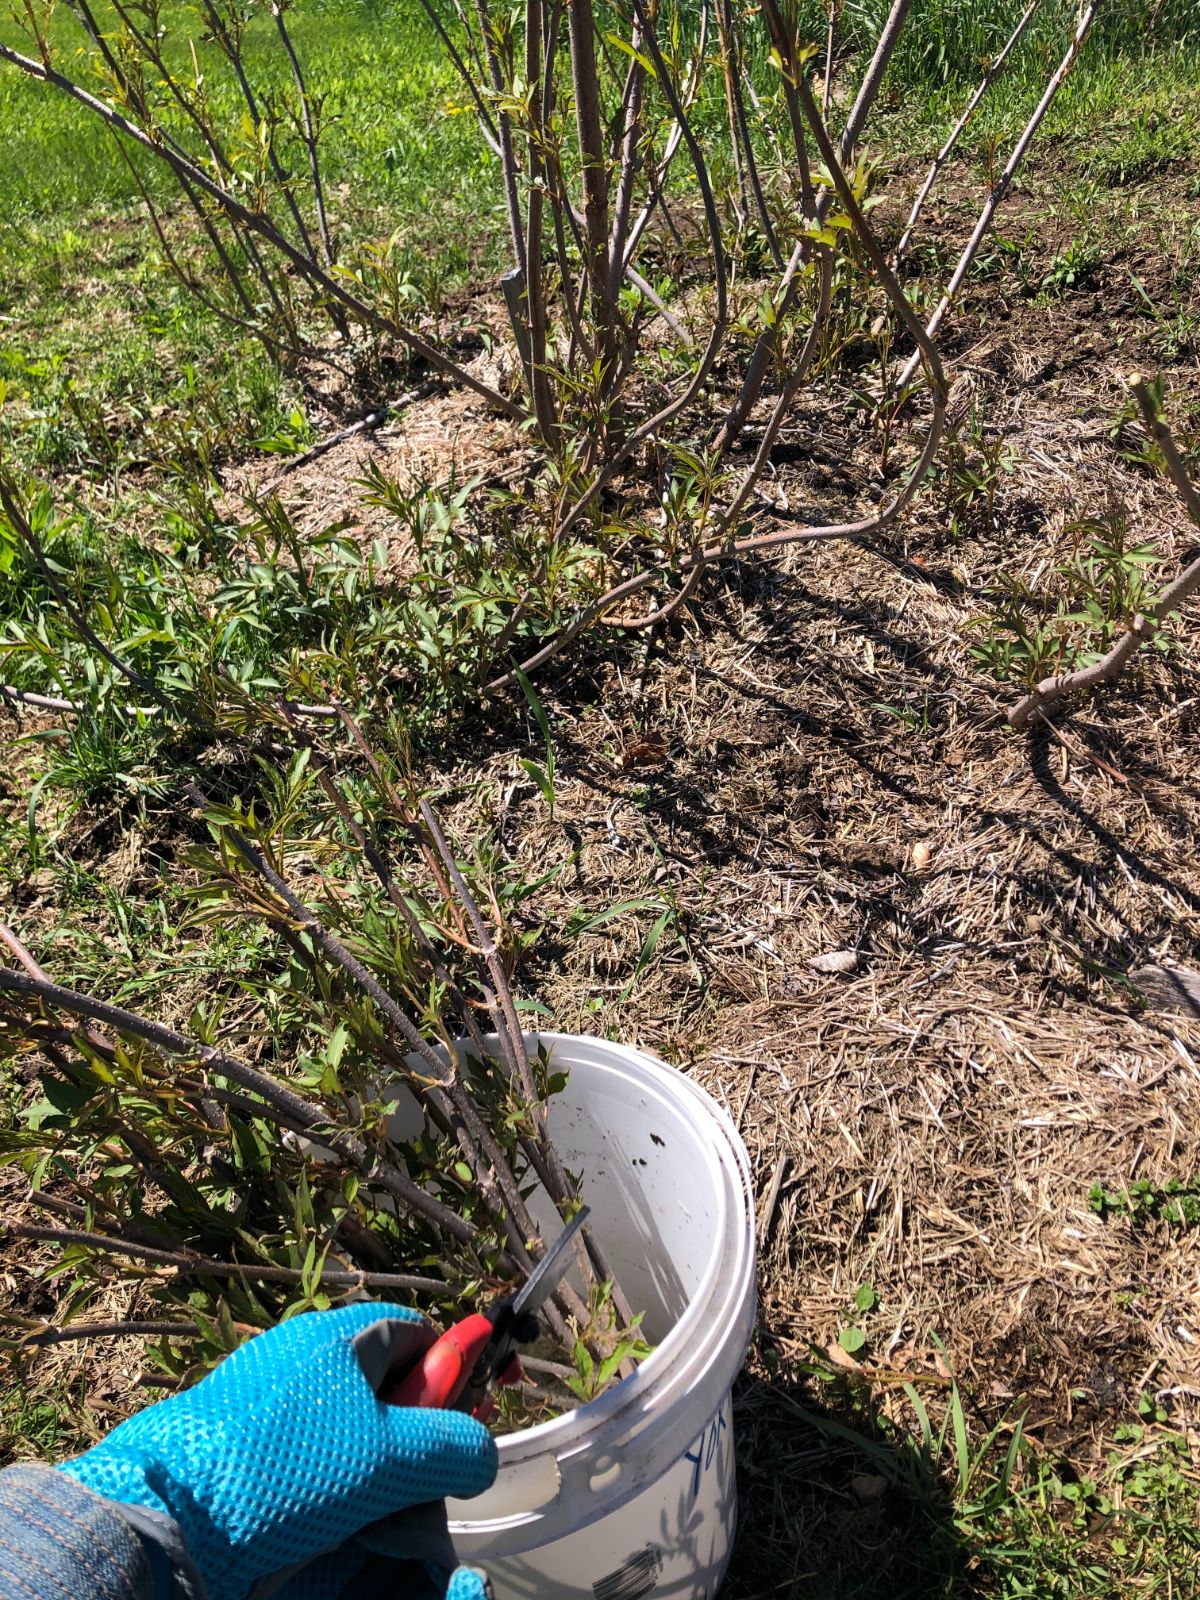 A bucket with hardwood elderberry cutting and a bush with young side shoots that can be dug up and transplanted.